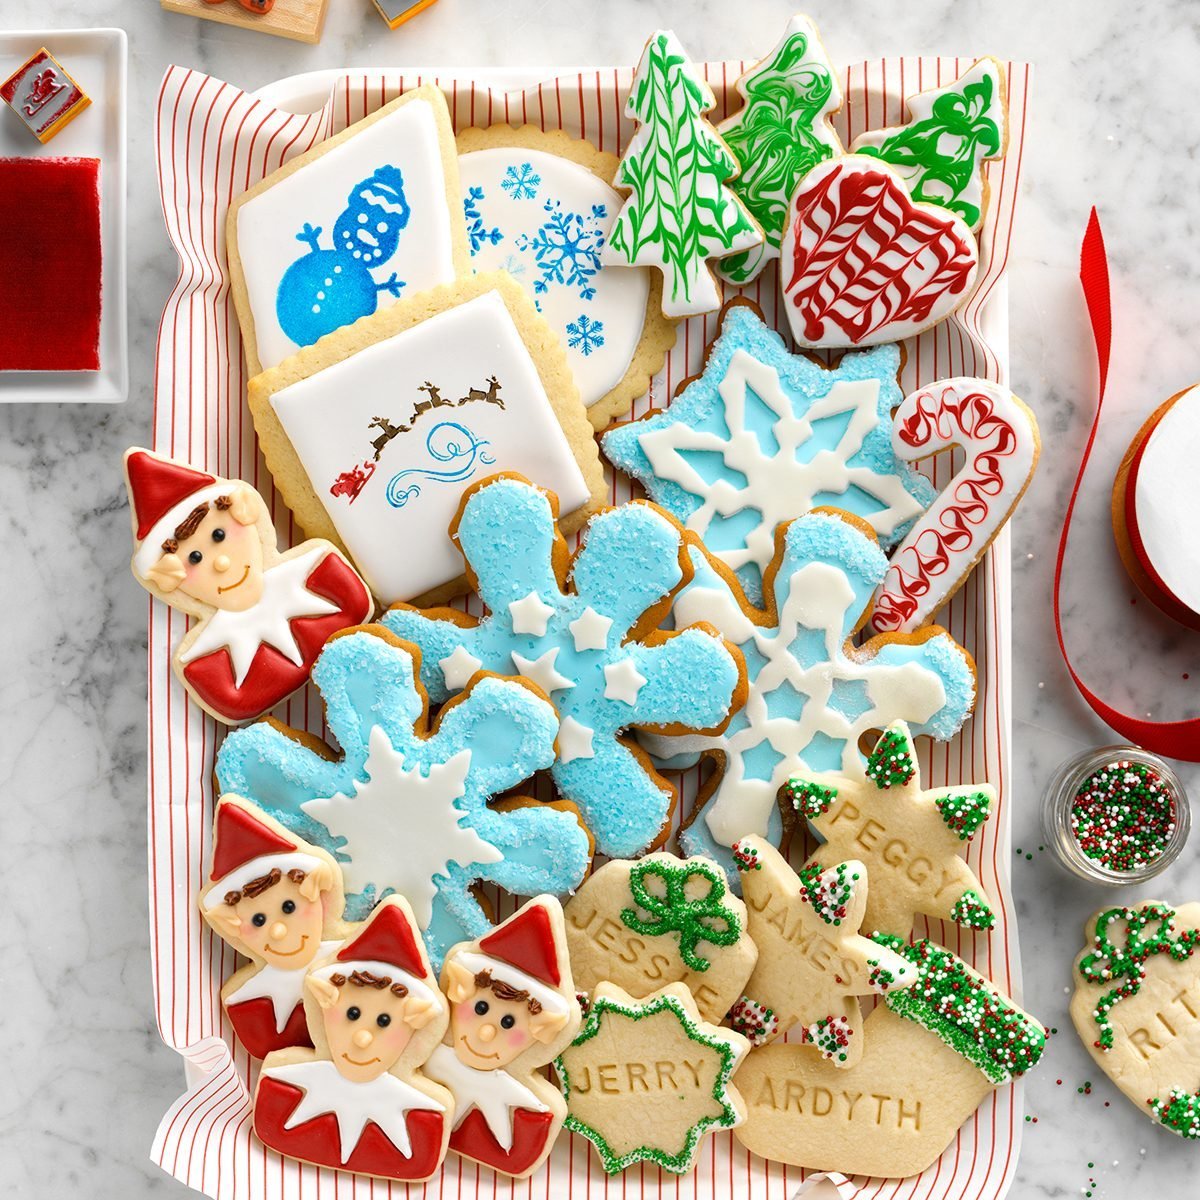 23 Christmas Cookie Decorating Ideas to Try This Year